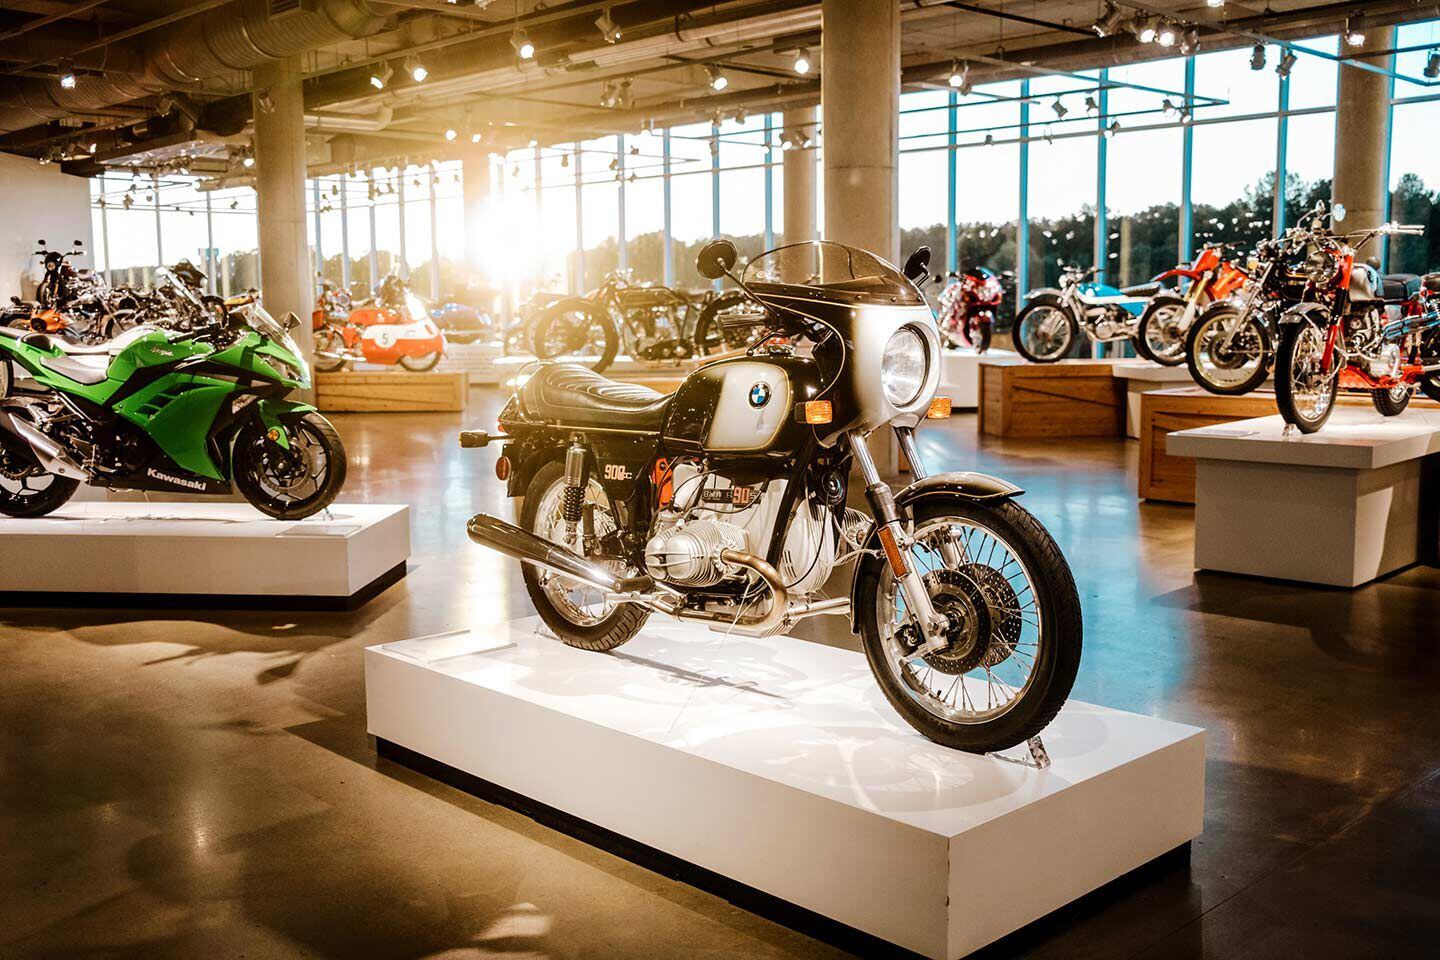 A BMW R90S gets an afternoon glamor shot in the Barber Motorsports Museum.